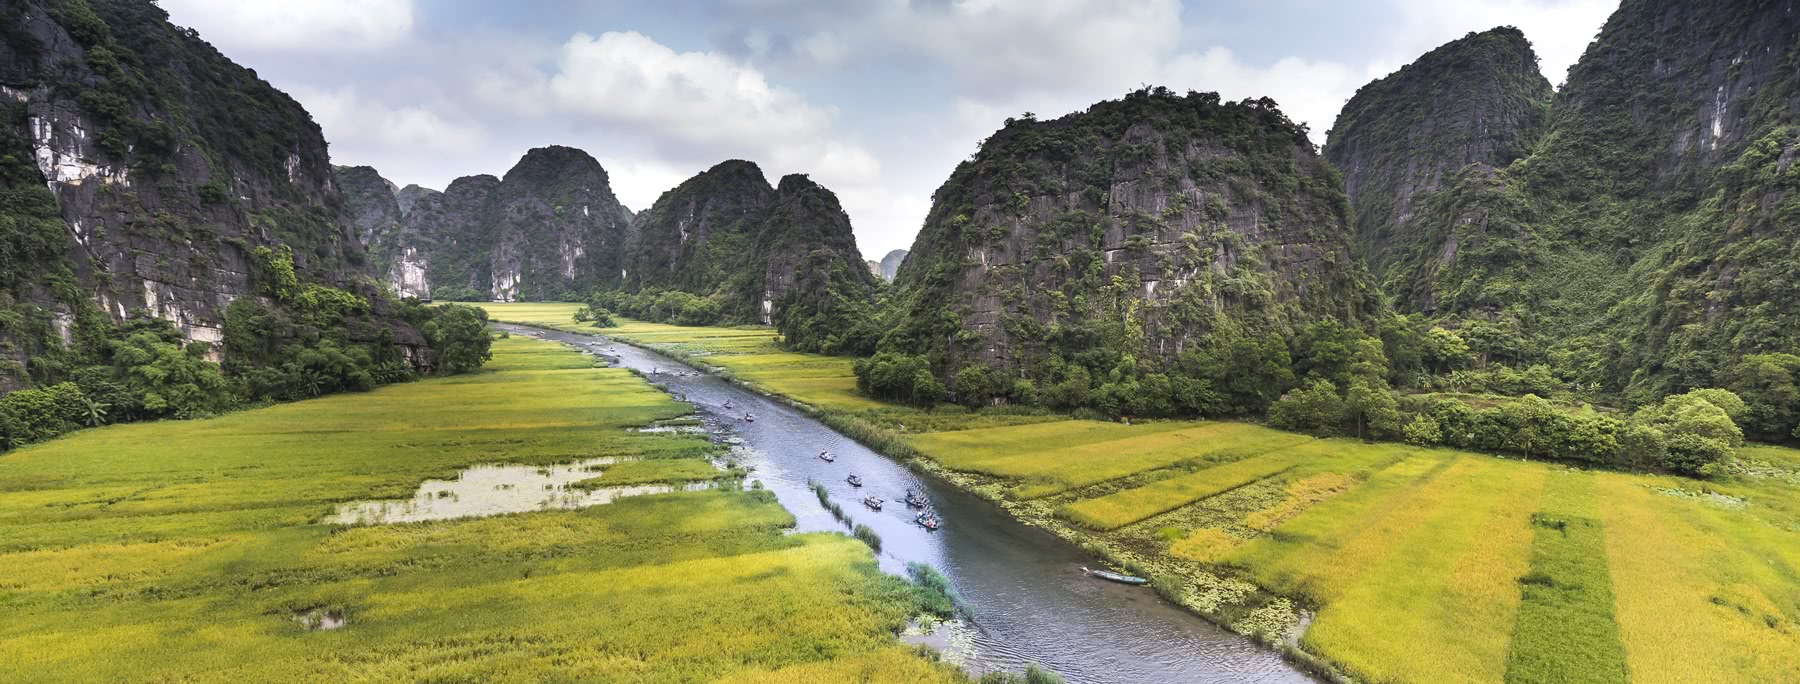 Boats on the river in Nin Binh surrounded by rocky outcrops